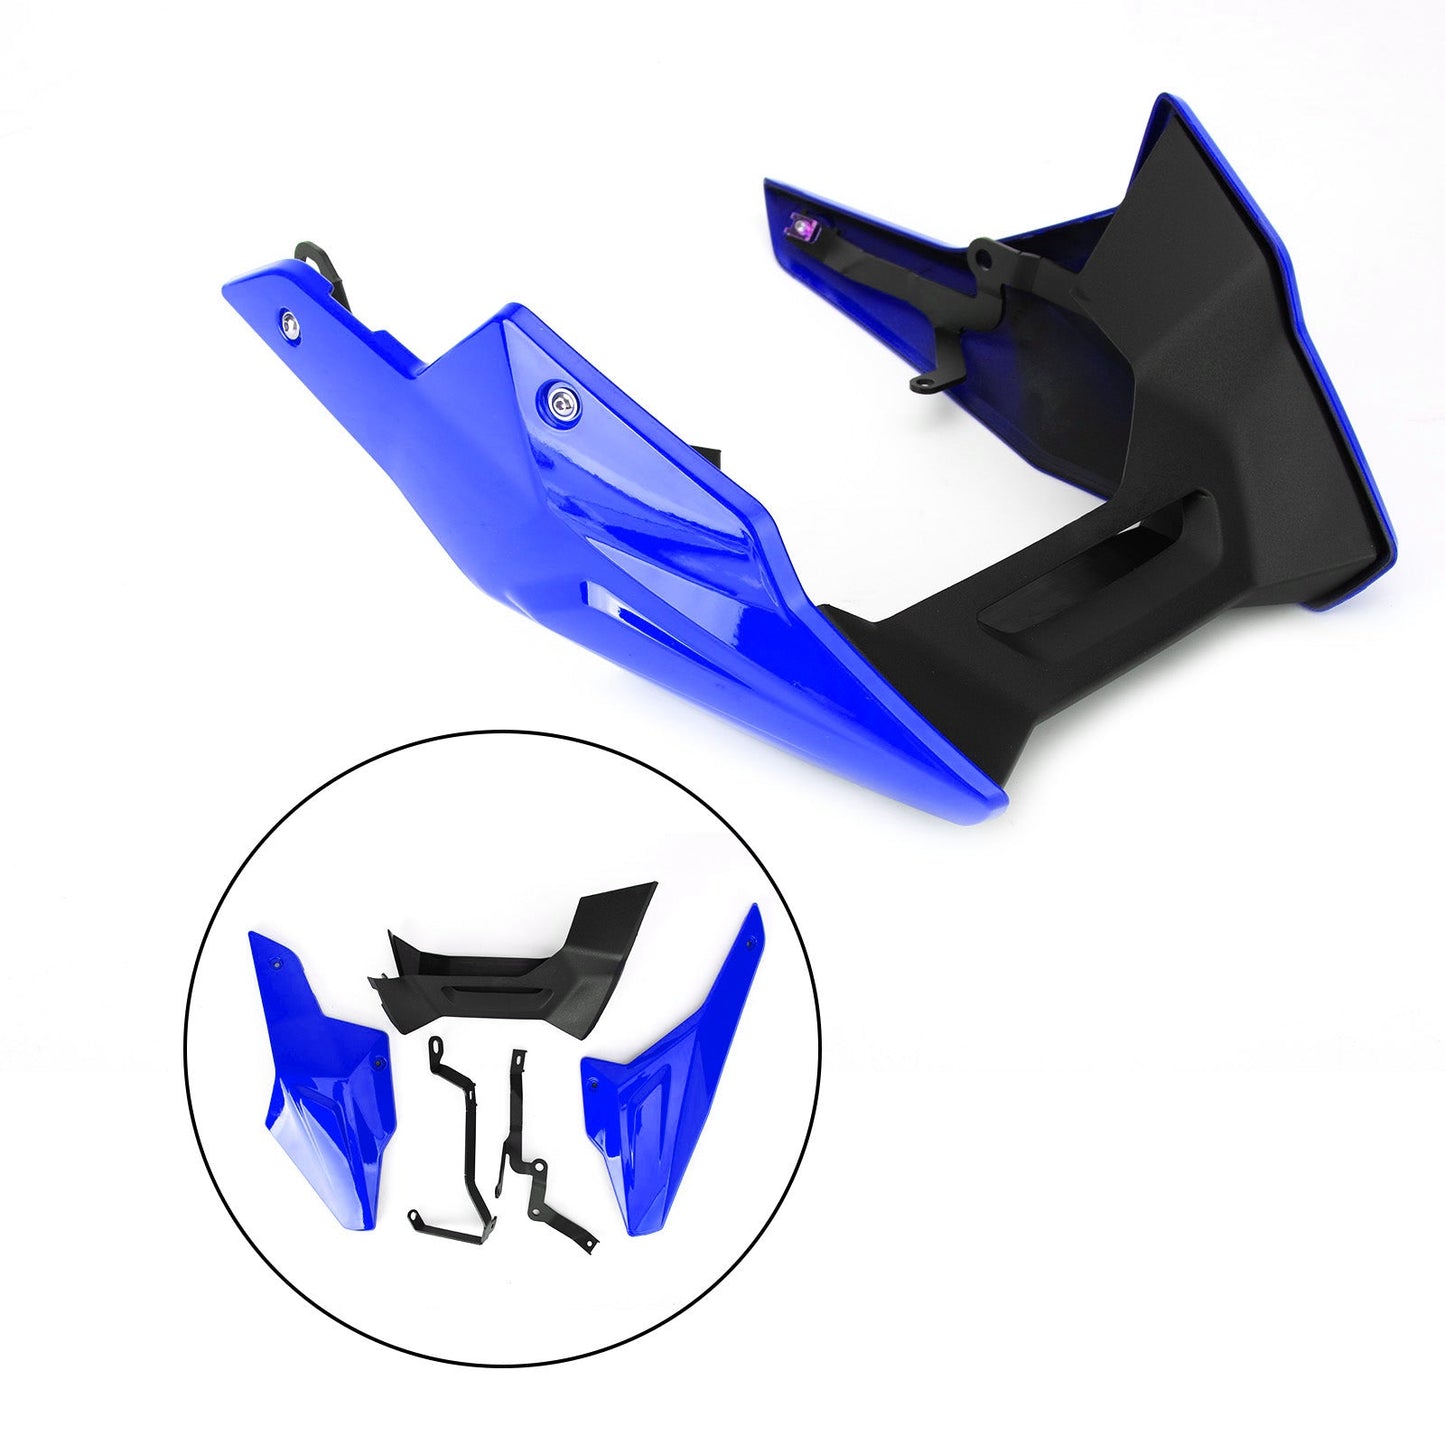 Engine Panel Belly Pan Lower Cowling Cover Fairing for BMW F900R/F900XR 2020-21 Blue